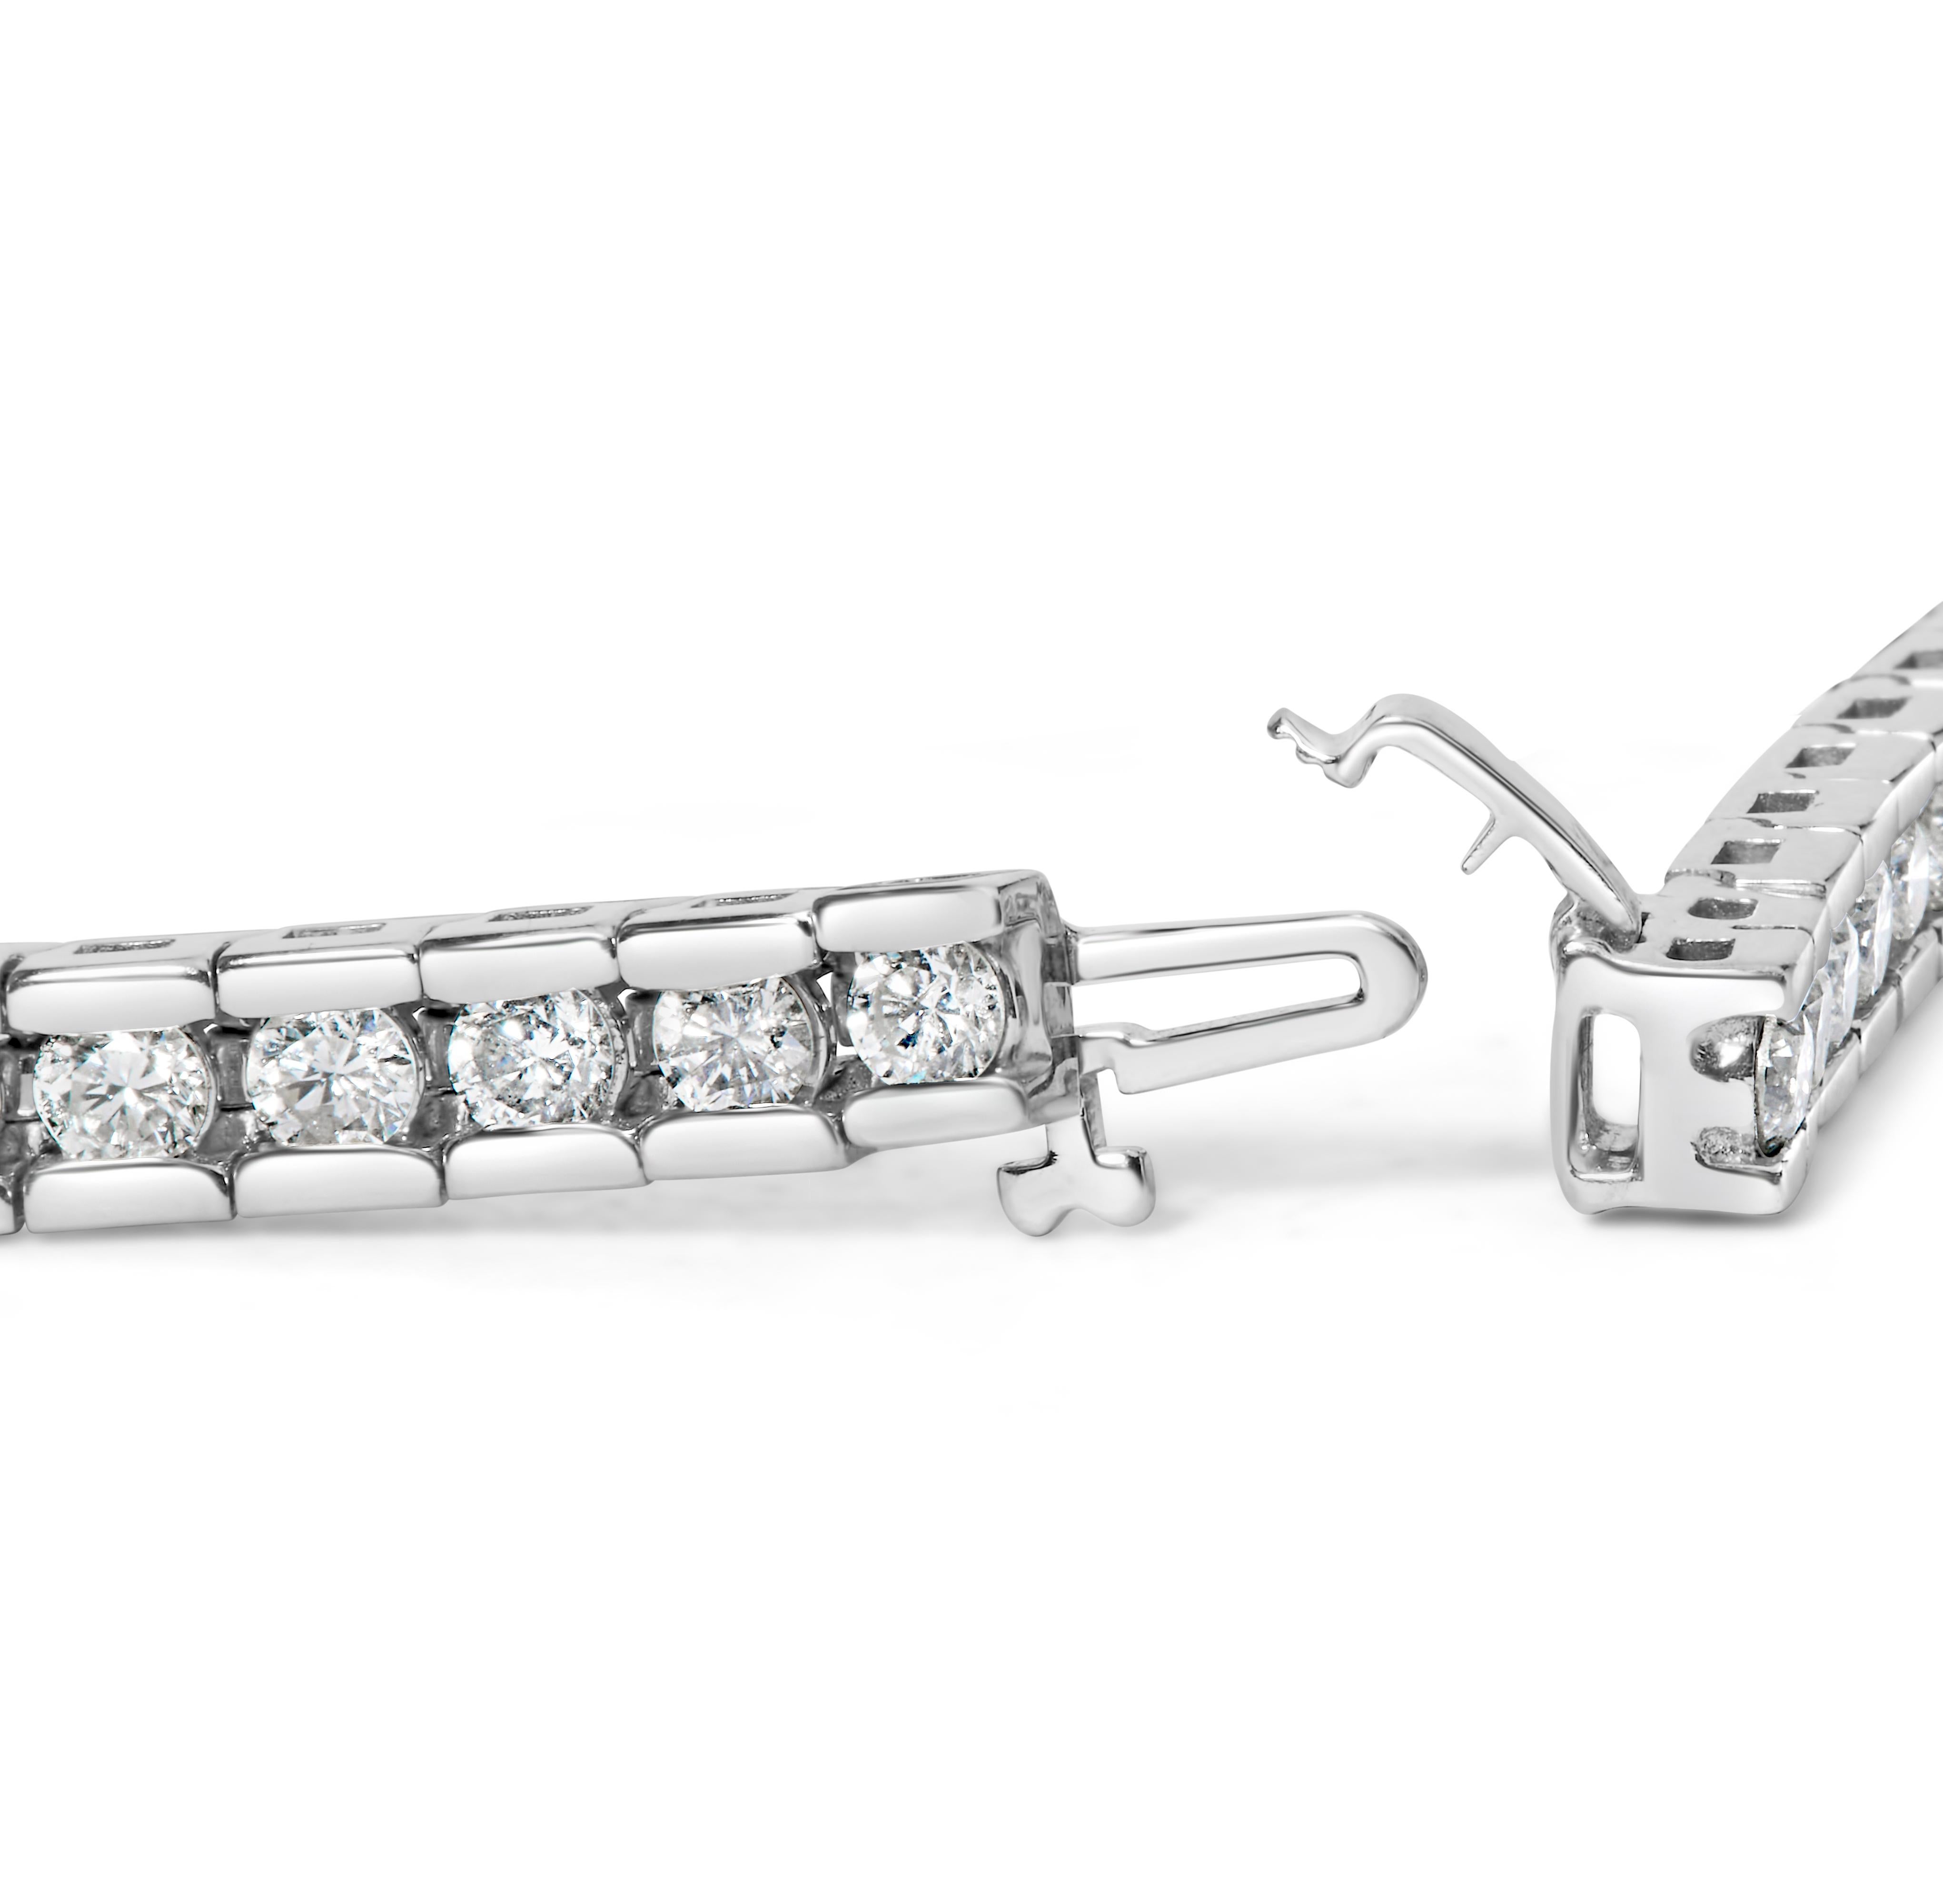 Timeless beauty presents itself in fine form in this gorgeous diamond tennis bracelet. Crafted in polished 14K white gold, this bracelet features 43 glimmering round diamonds of 6 total cttw, each with a color grade of I-J and a clarity of I1-I2.